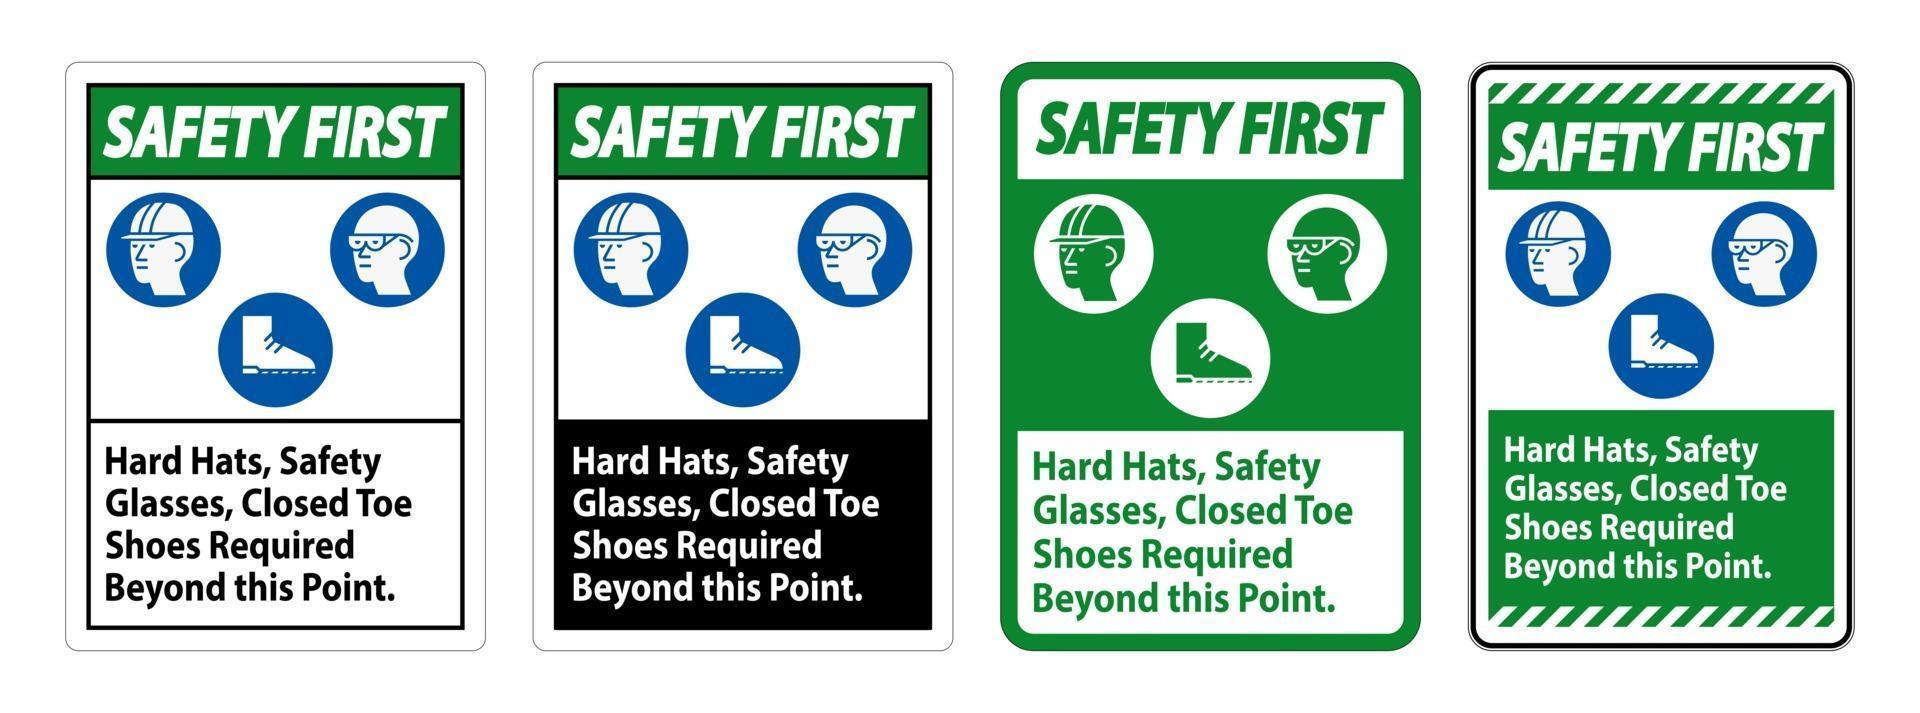 Hard Hats, Safety Glasses Closed Toe Shoes Required Beyond This Point vector